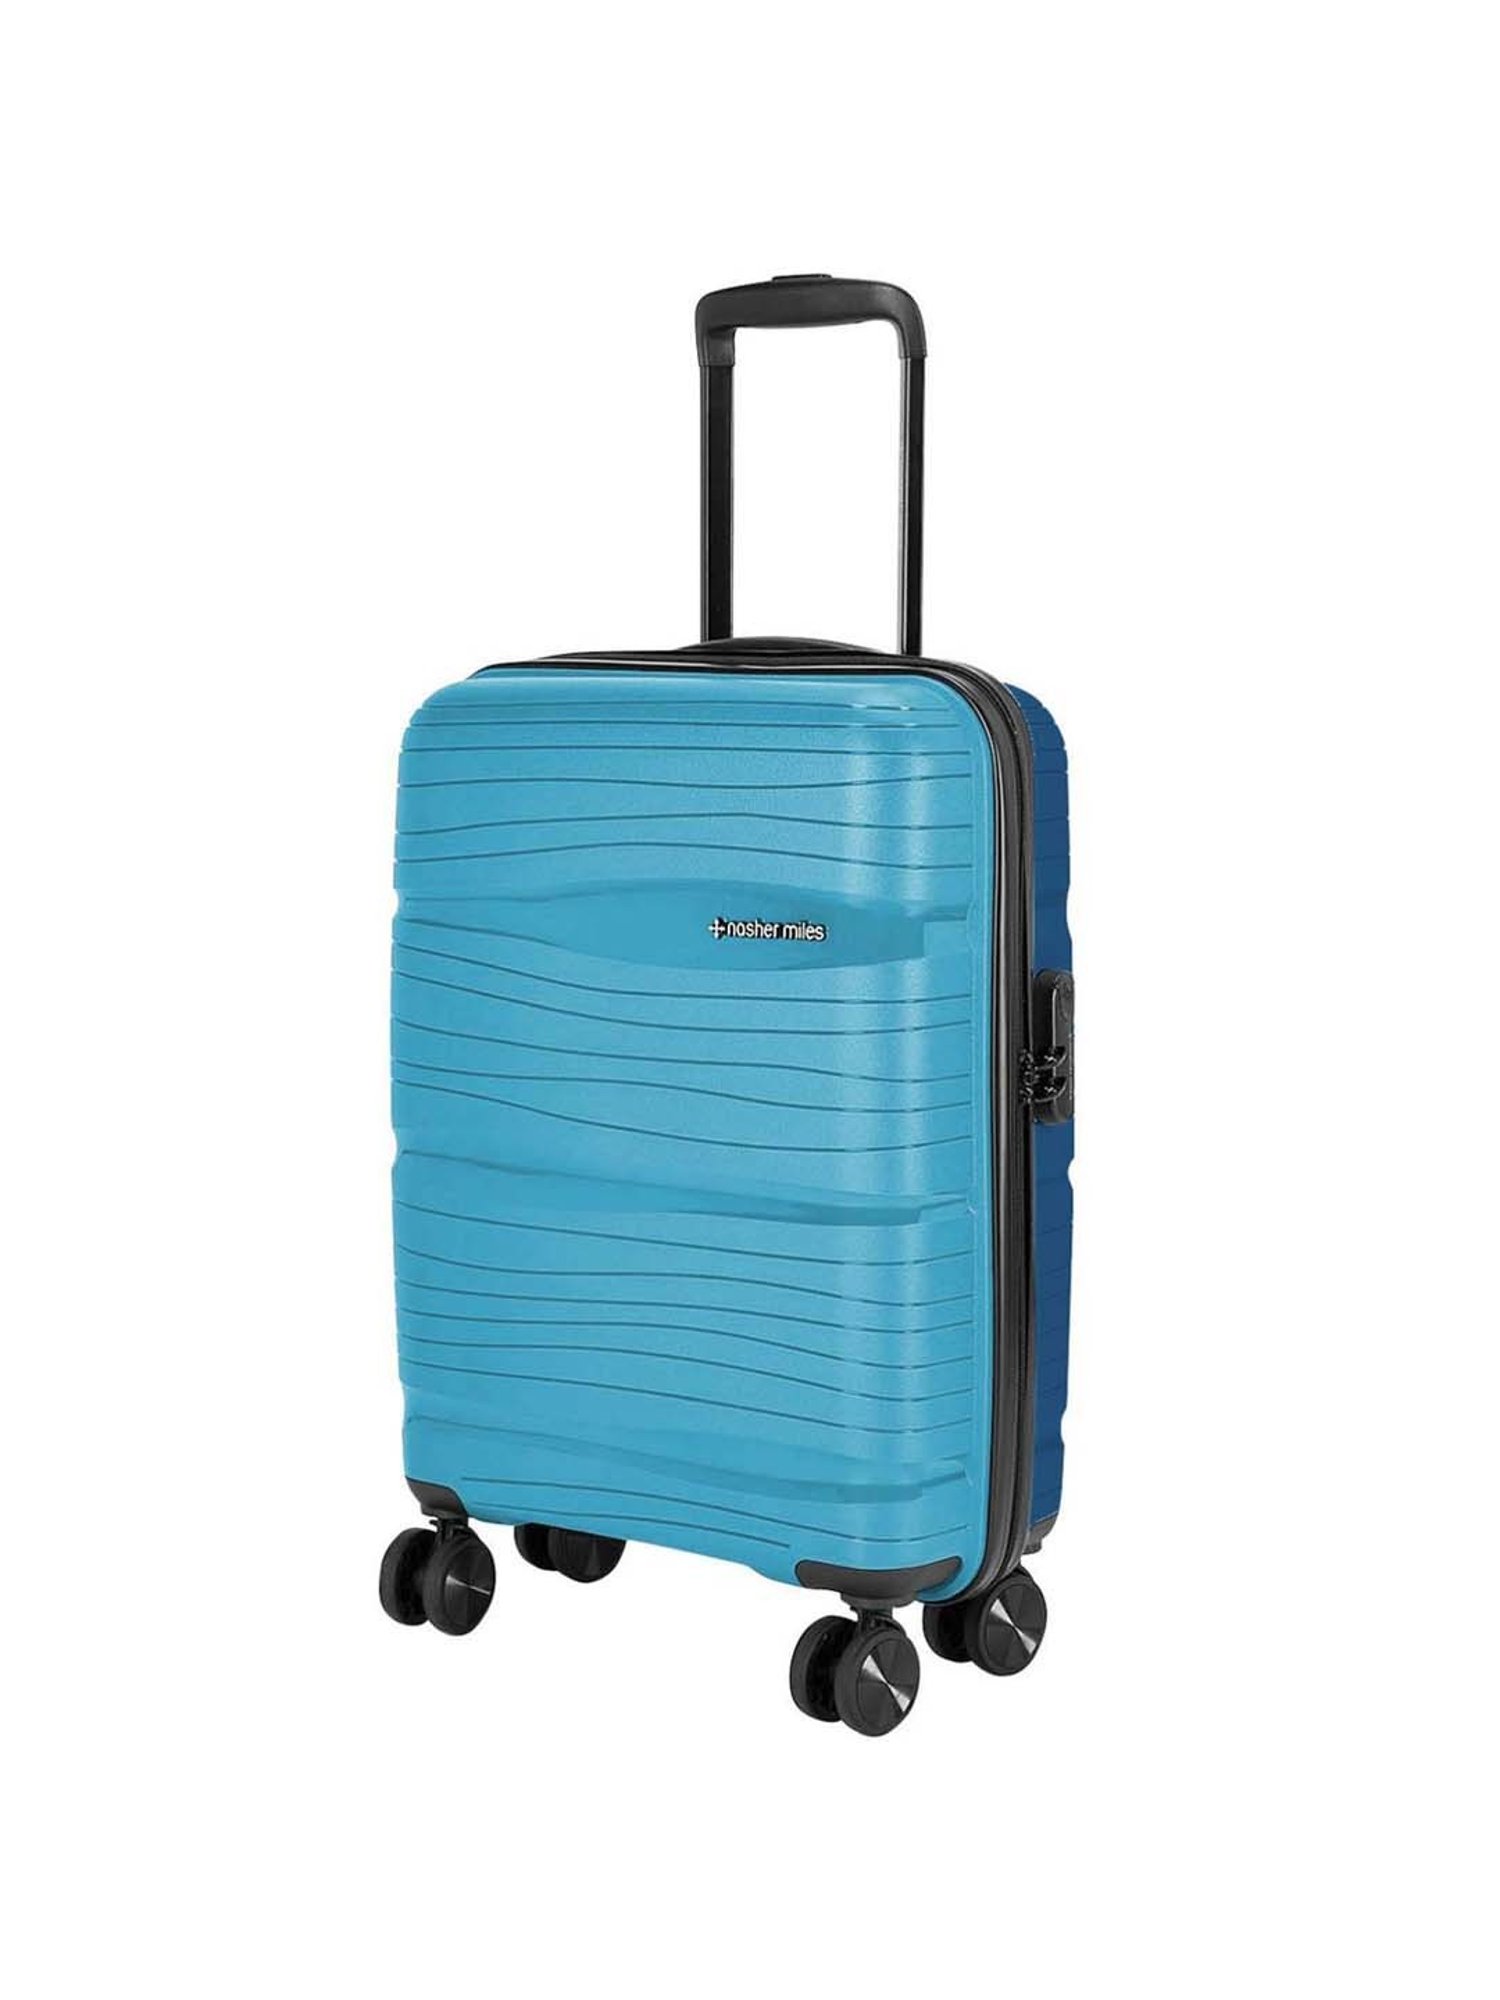 VIP SMALL CABIN SIZE 8 WHEELS UNBREAKABLE TROLLEY BAG 55 CM Cabin Suitcase   22 inch RED  Price in India  Flipkartcom